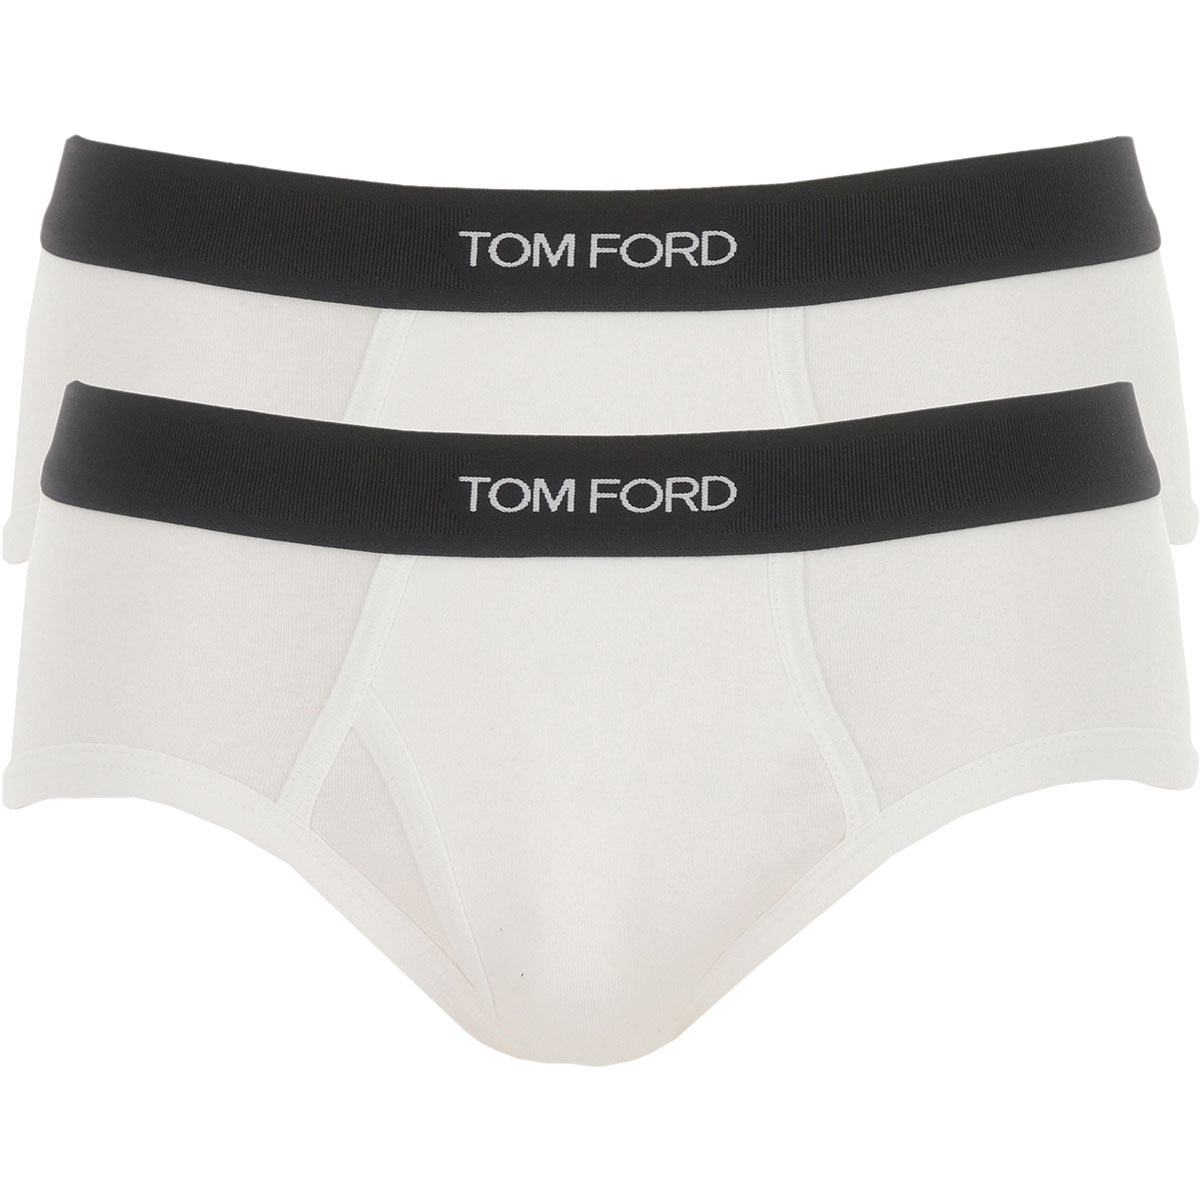 Mens Underwear Tom Ford, Style code: t4xc1-1040-100